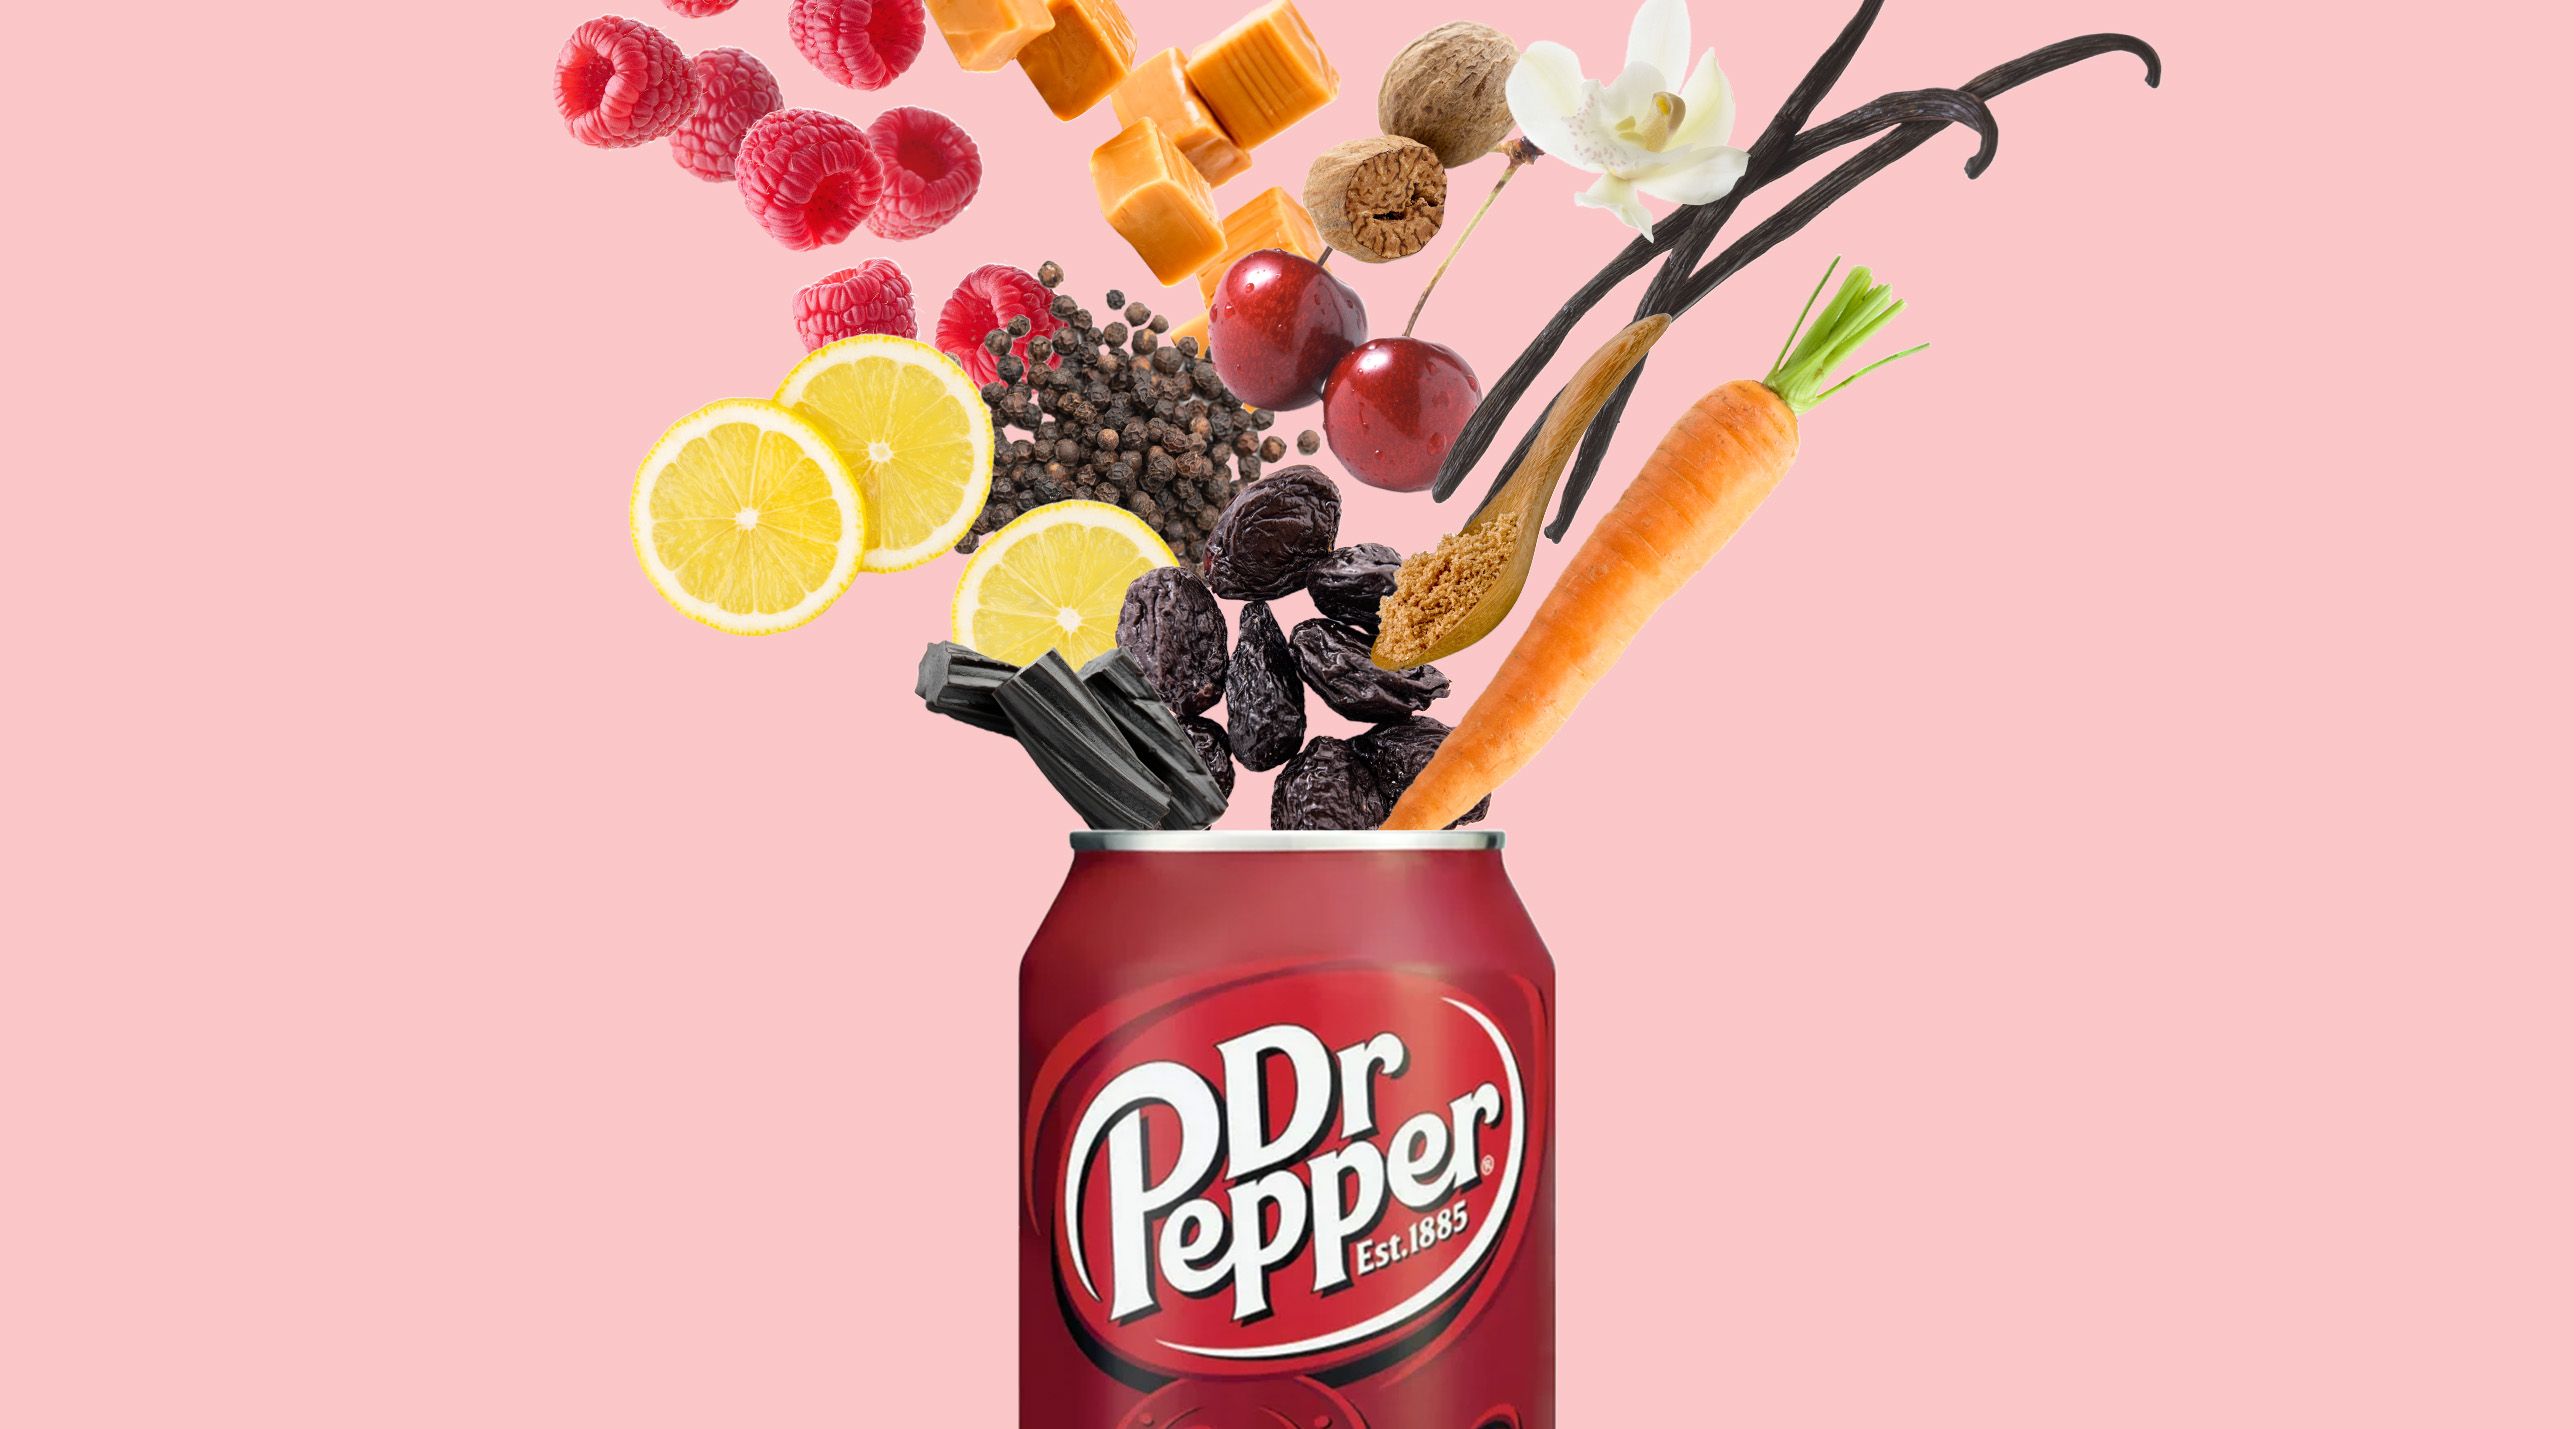 Dr Pepper Ingredients - The 23 Flavors In Dr Pepper